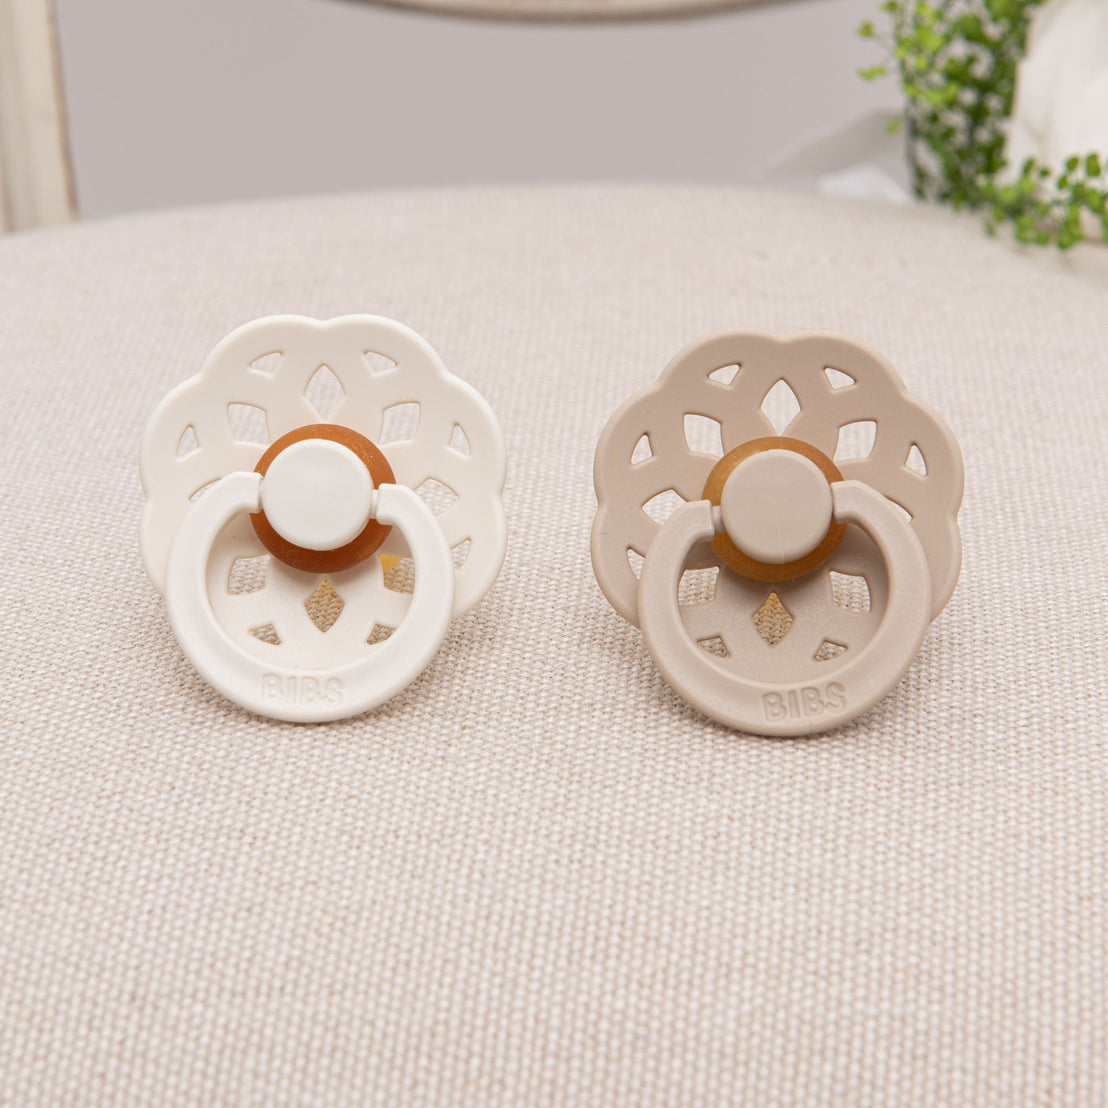 Two natural rubber pacifiers next to each other in colors ivory and vanilla.